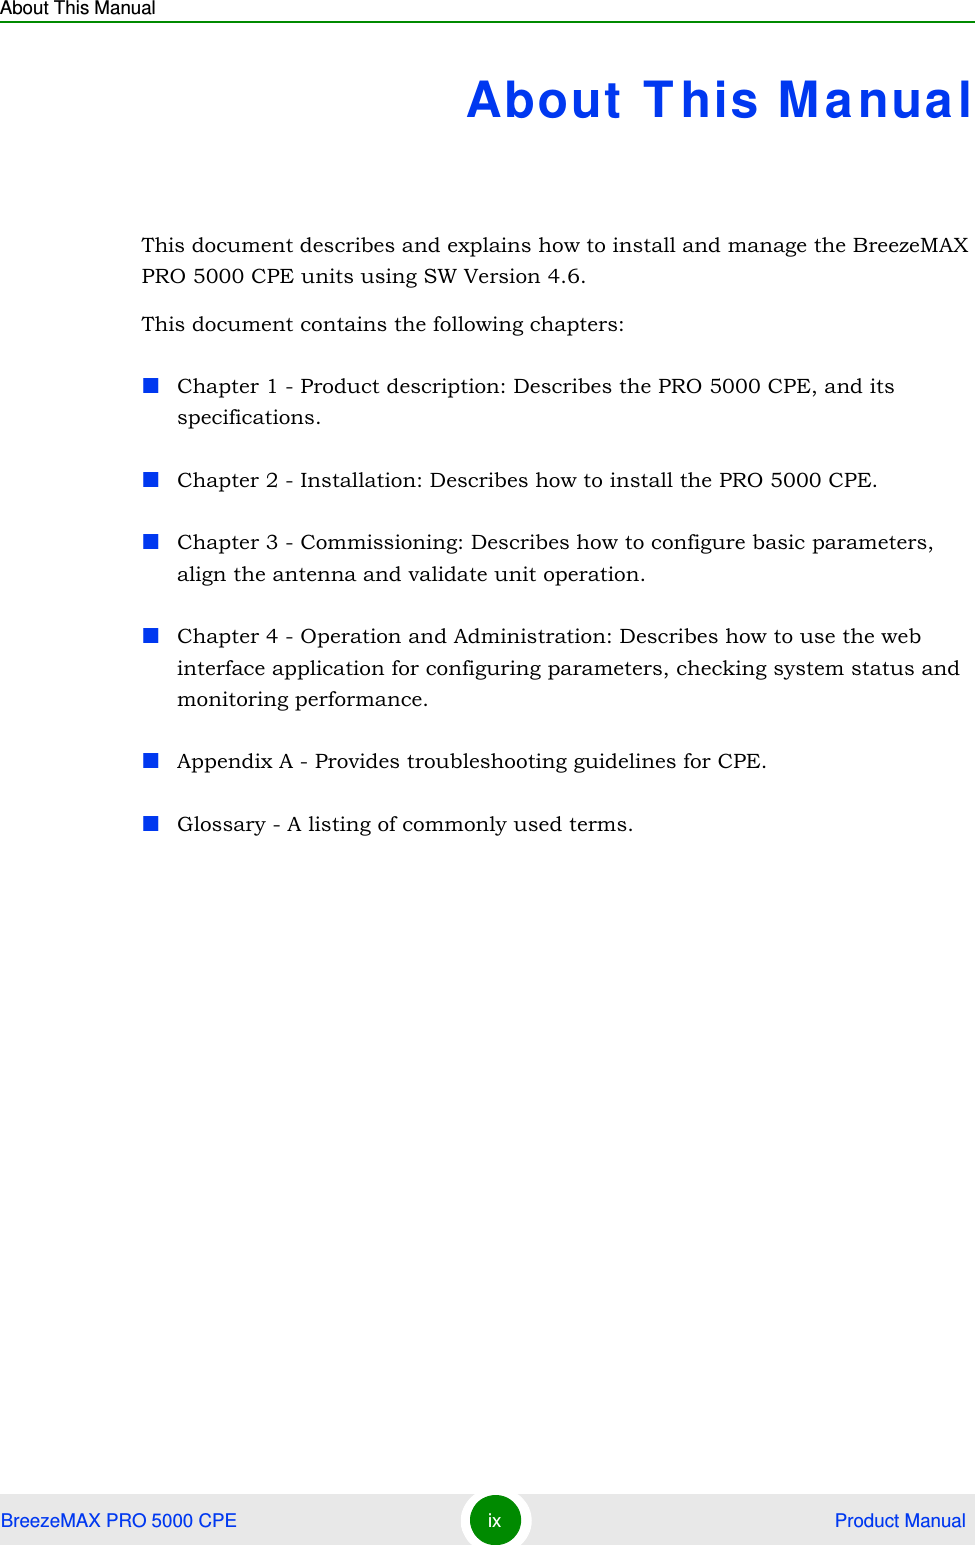 About This ManualBreezeMAX PRO 5000 CPE ix  Product ManualAbout This ManualThis document describes and explains how to install and manage the BreezeMAX PRO 5000 CPE units using SW Version 4.6.This document contains the following chapters:Chapter 1 - Product description: Describes the PRO 5000 CPE, and its specifications.Chapter 2 - Installation: Describes how to install the PRO 5000 CPE.Chapter 3 - Commissioning: Describes how to configure basic parameters, align the antenna and validate unit operation.Chapter 4 - Operation and Administration: Describes how to use the web interface application for configuring parameters, checking system status and monitoring performance. Appendix A - Provides troubleshooting guidelines for CPE. Glossary - A listing of commonly used terms.